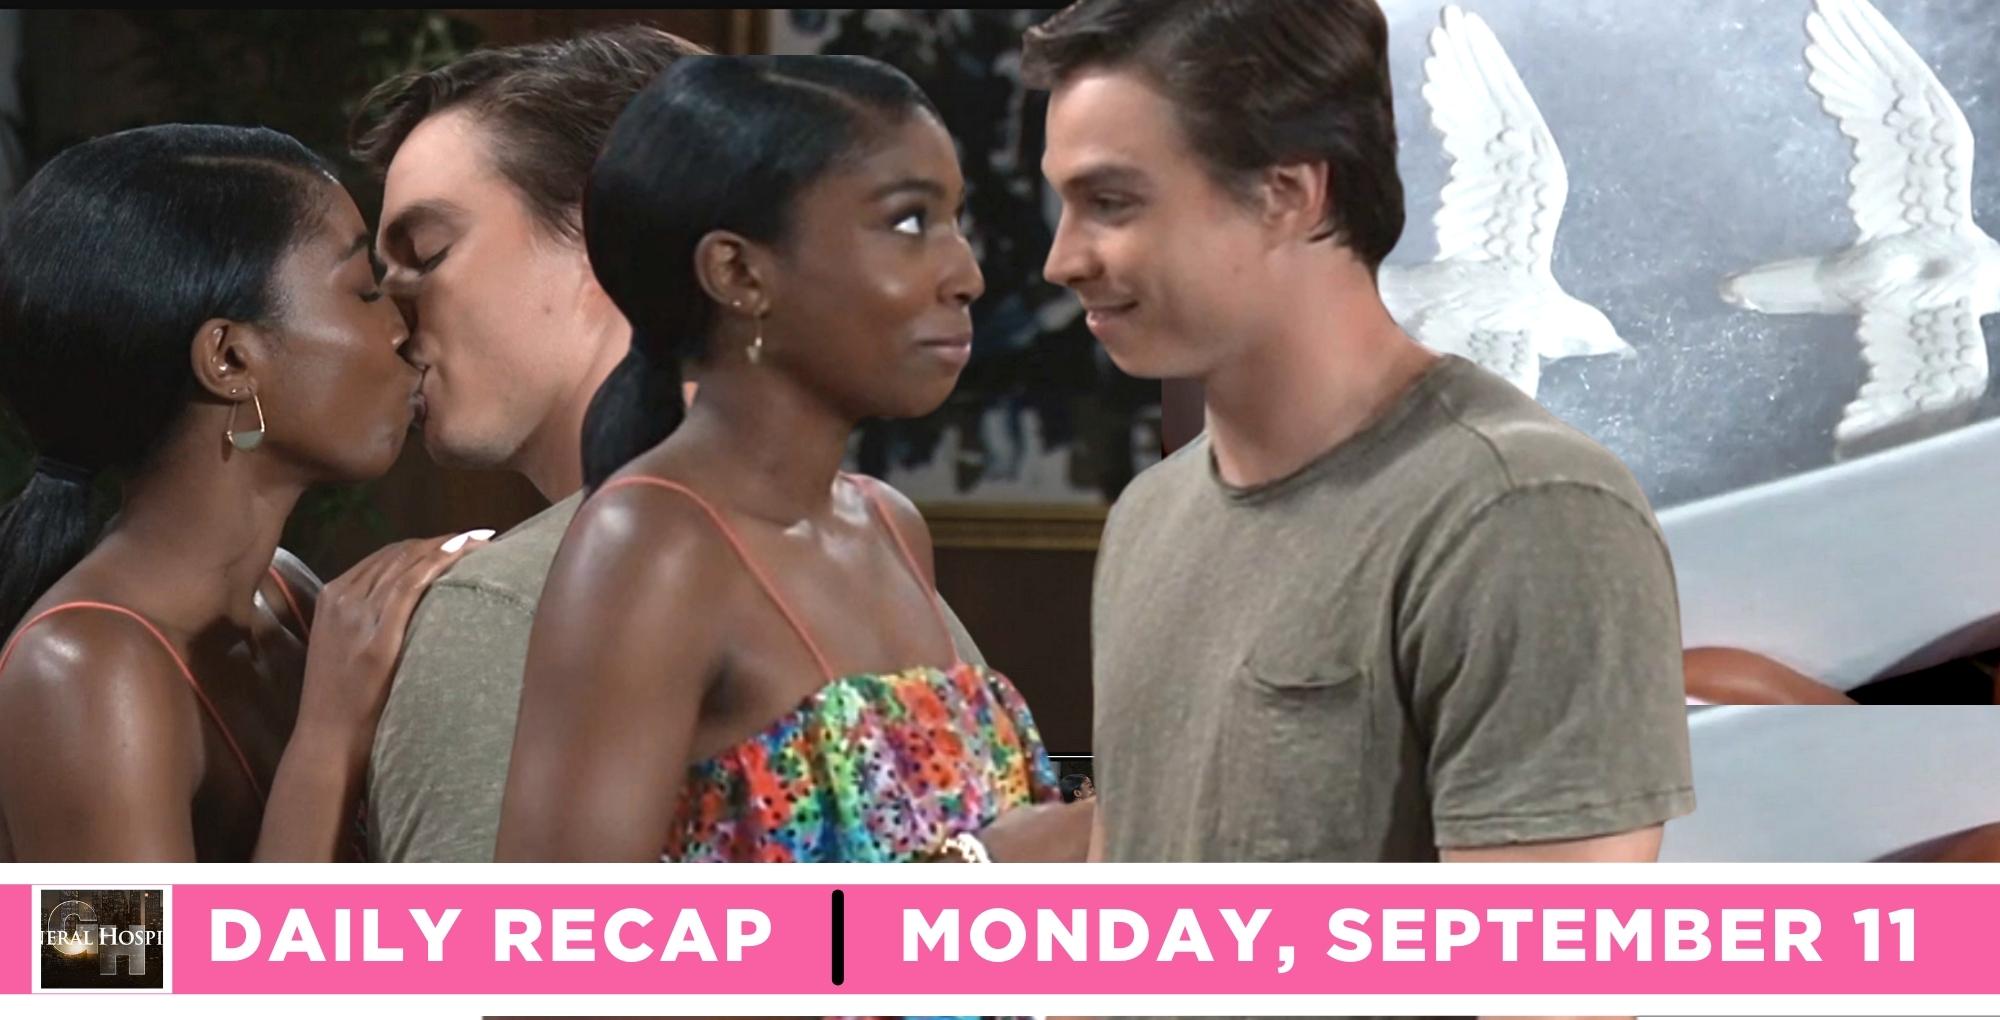 general hospital recap for september 11, 2023, has spencer and trina kissing, smliing and two turtle doves.